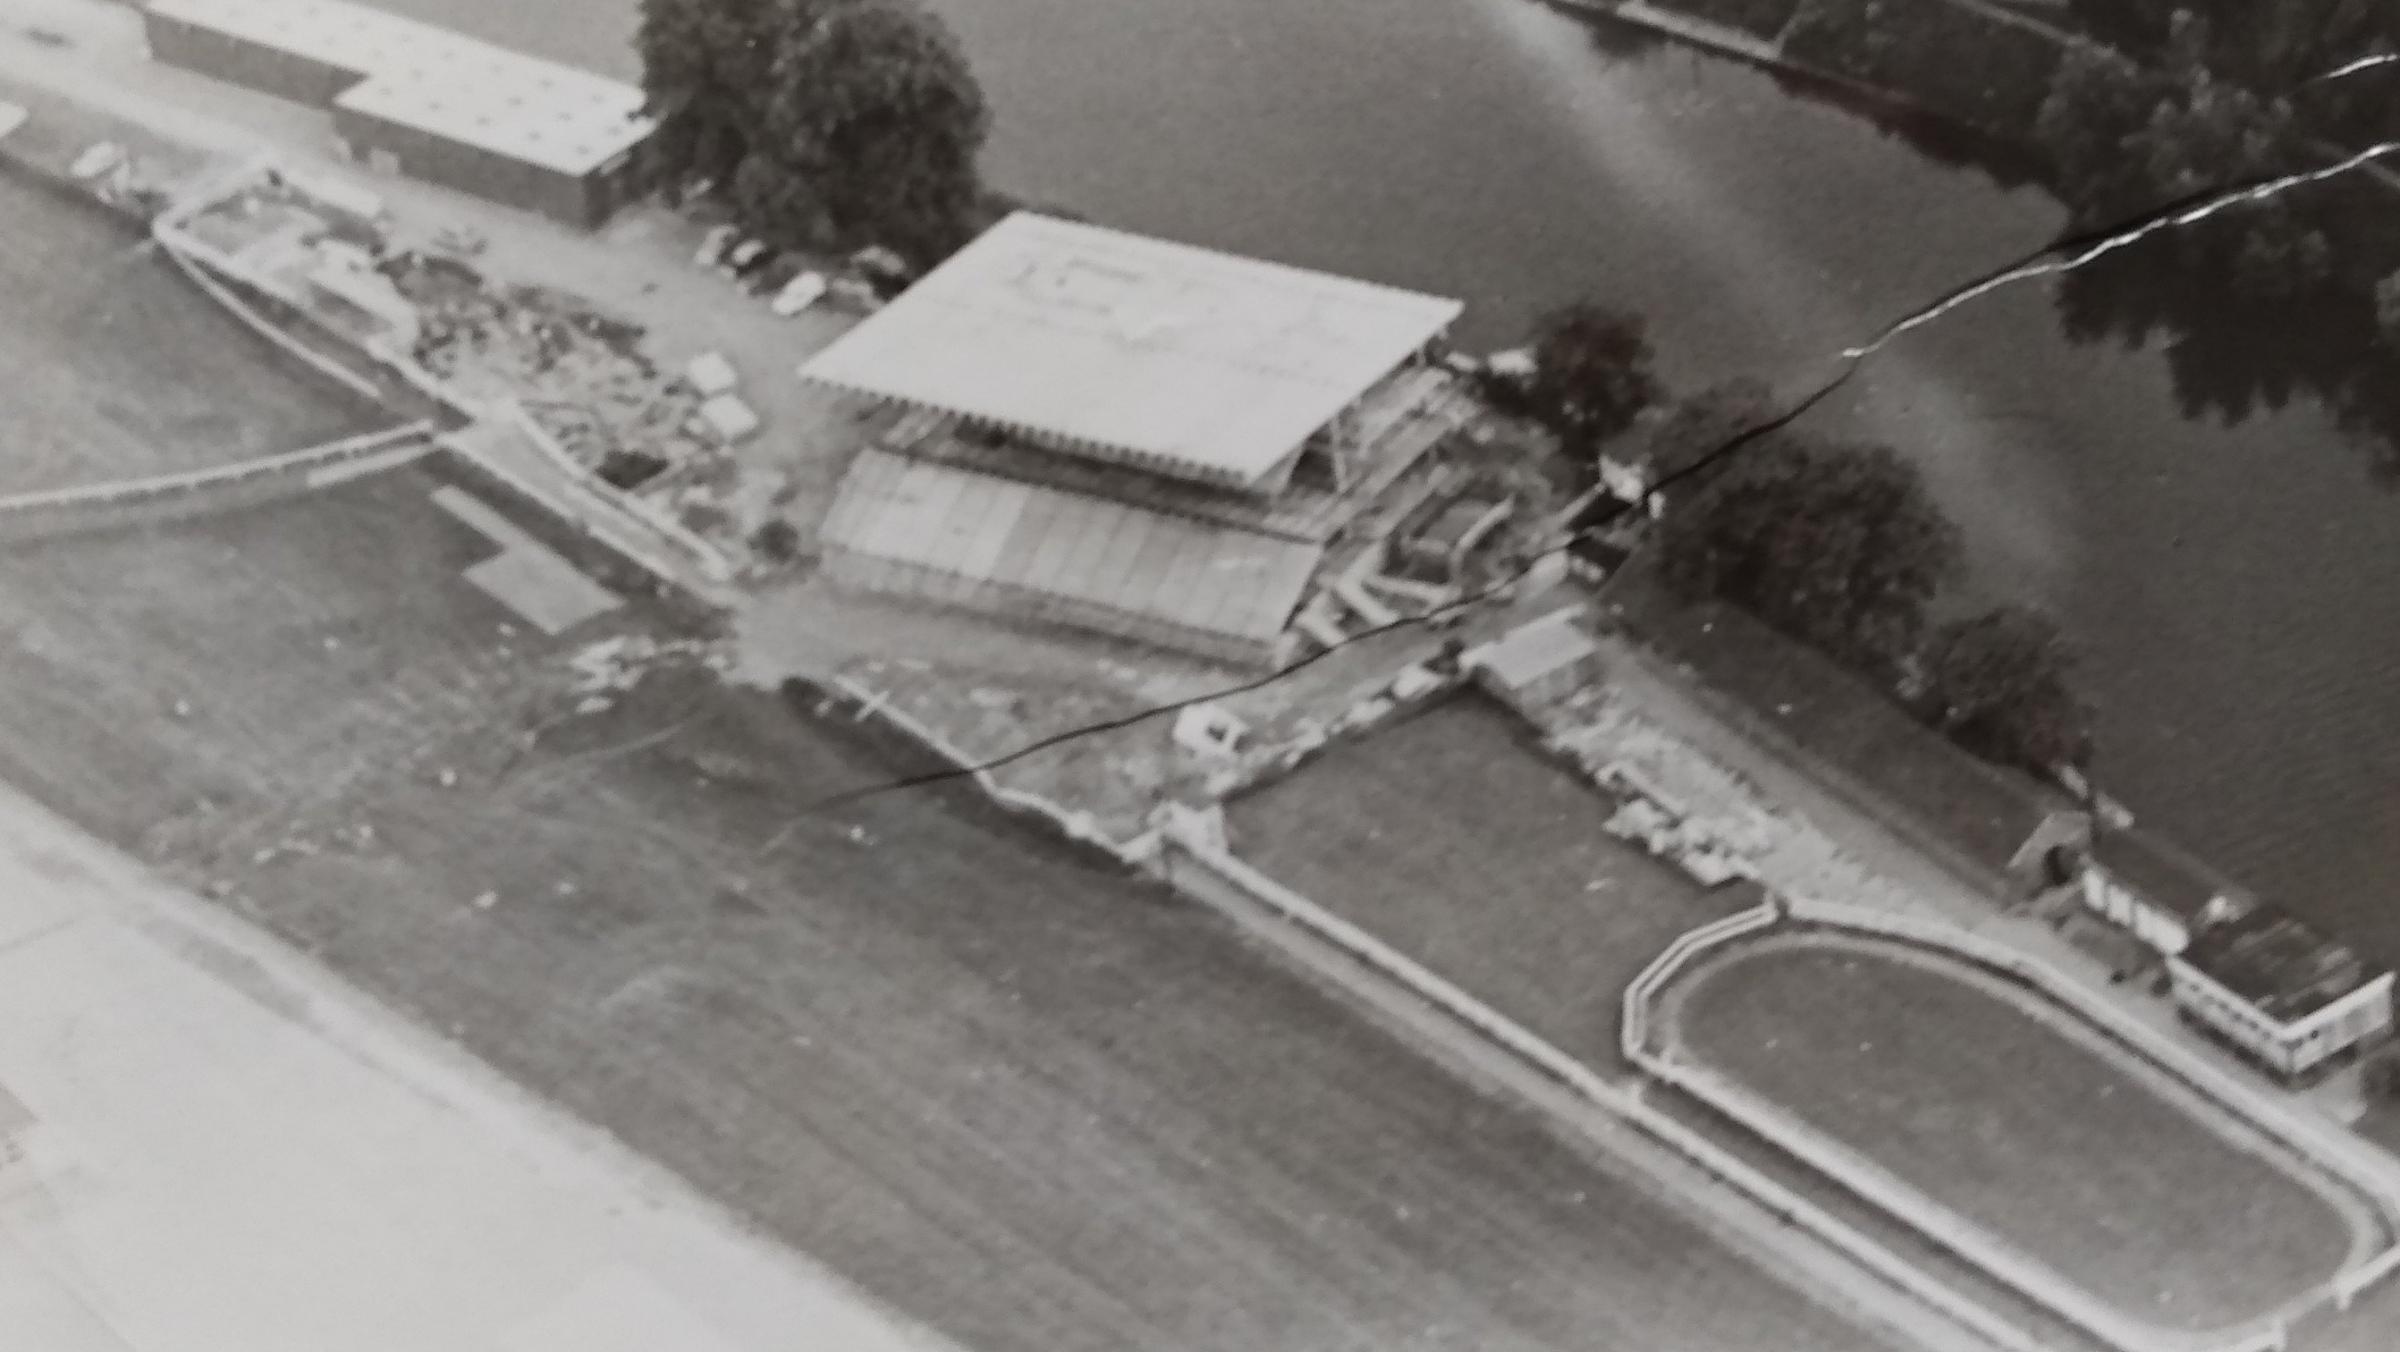 An aerial views of the grandstand construction in August 1974. And no, it’s not a bridge, it’s a crease in the image